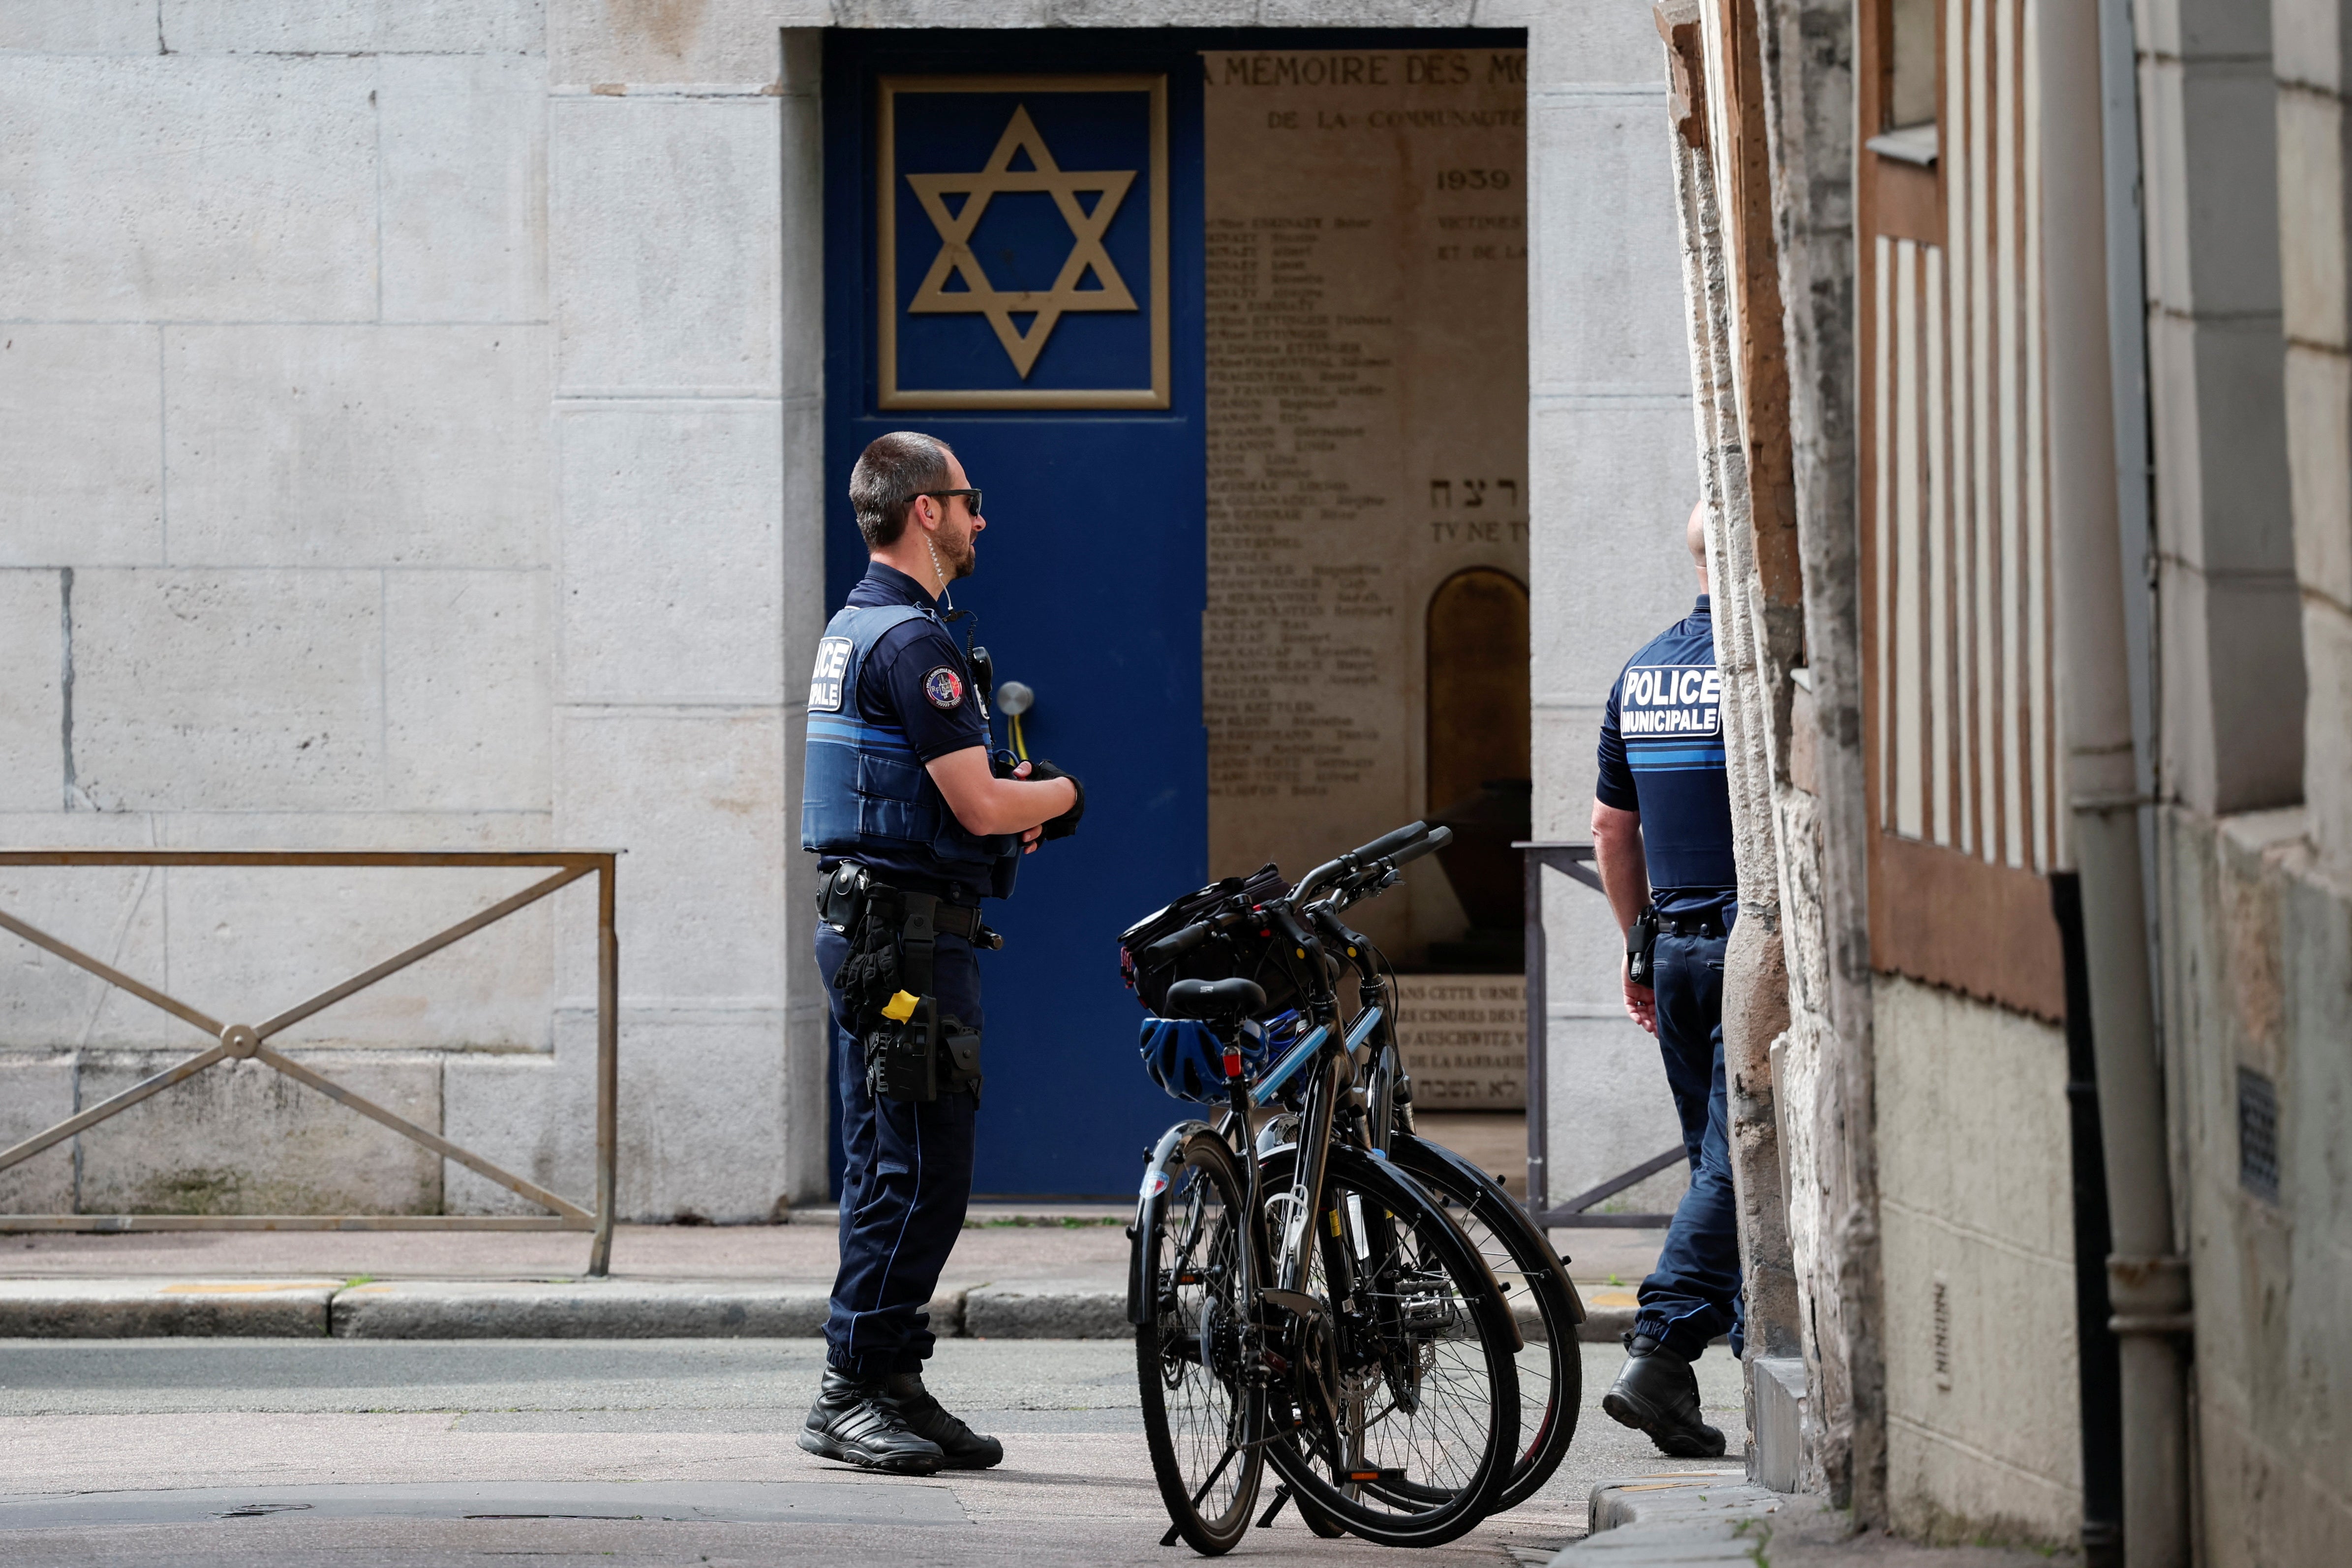 French police work near a door with the Jewish Star of David symbol after officers shot dead an armed man earlier who set fire to the city's synagogue in Rouen,